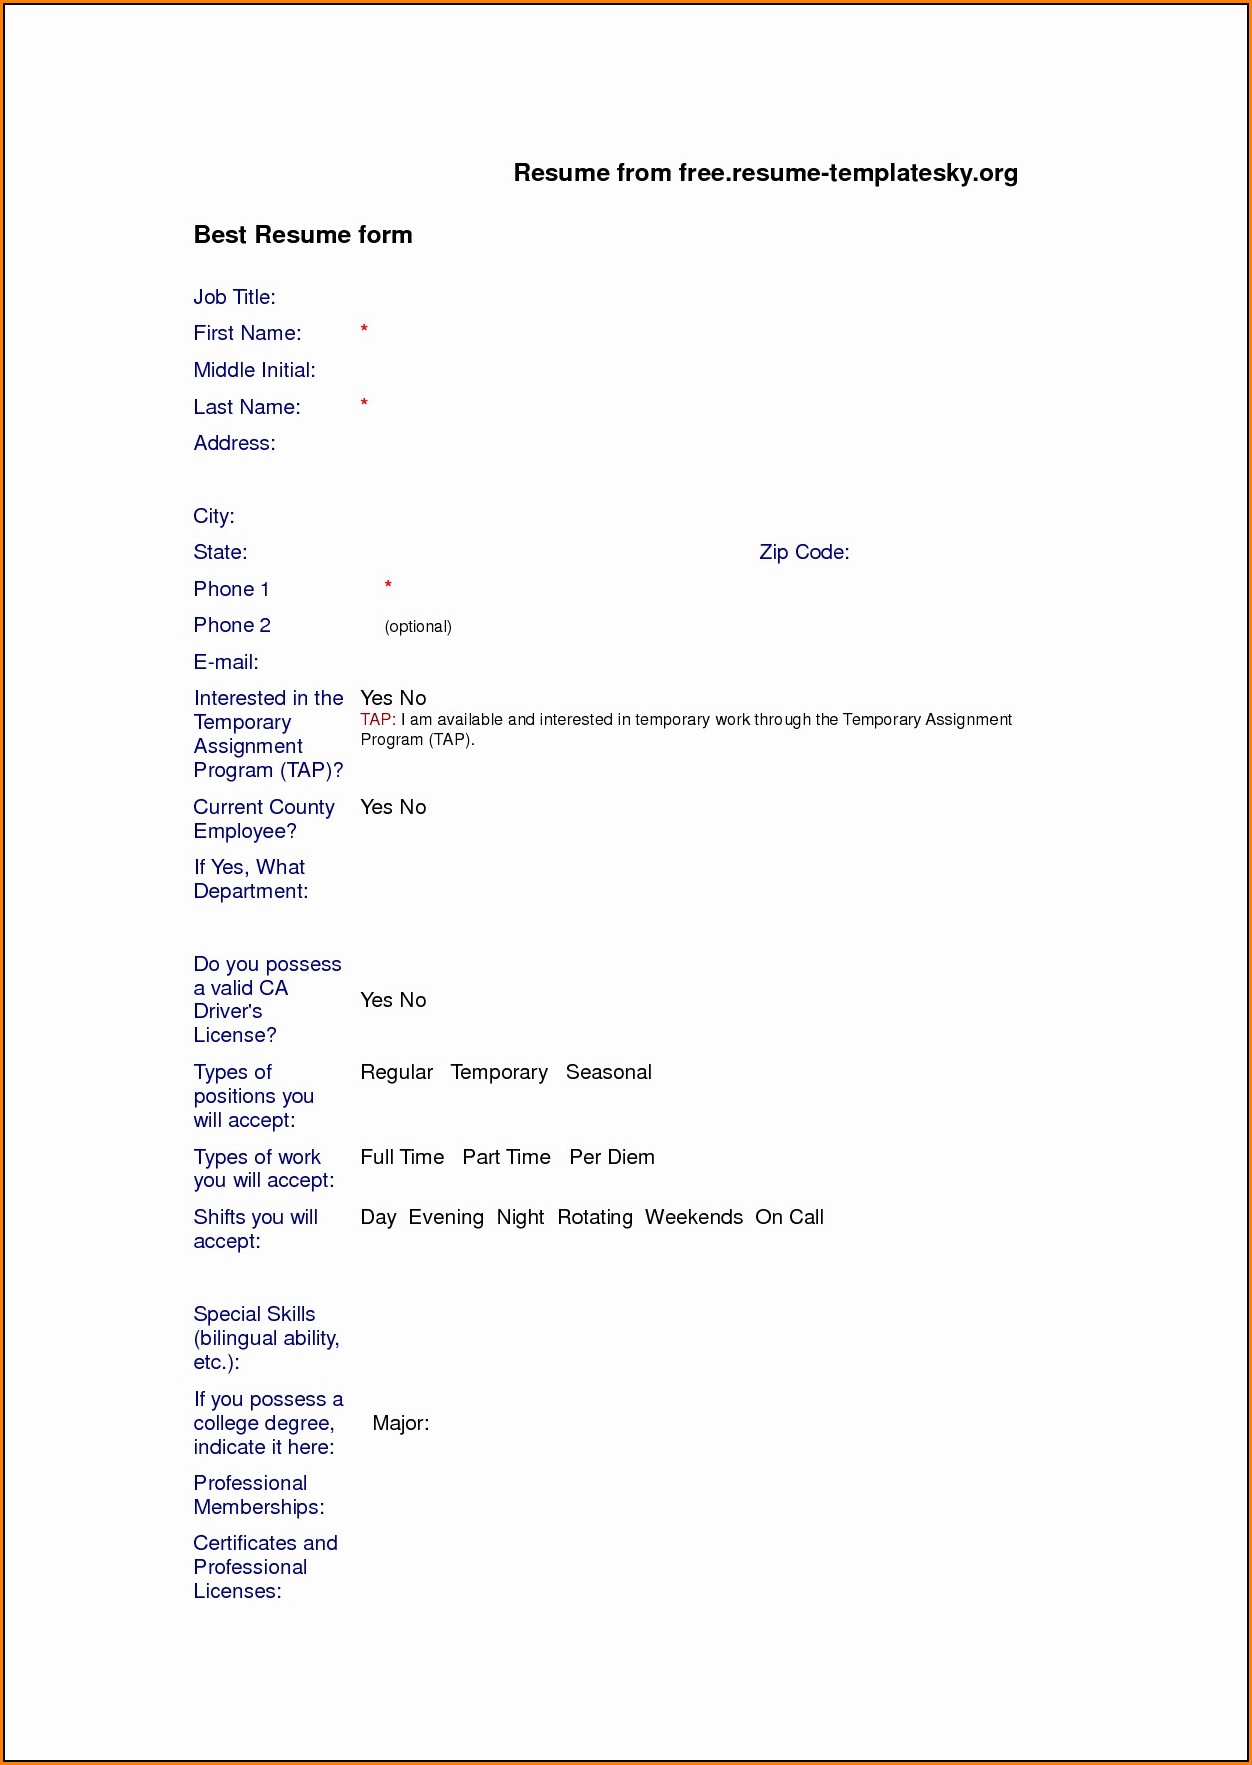 Blank Resume Forms Free Download